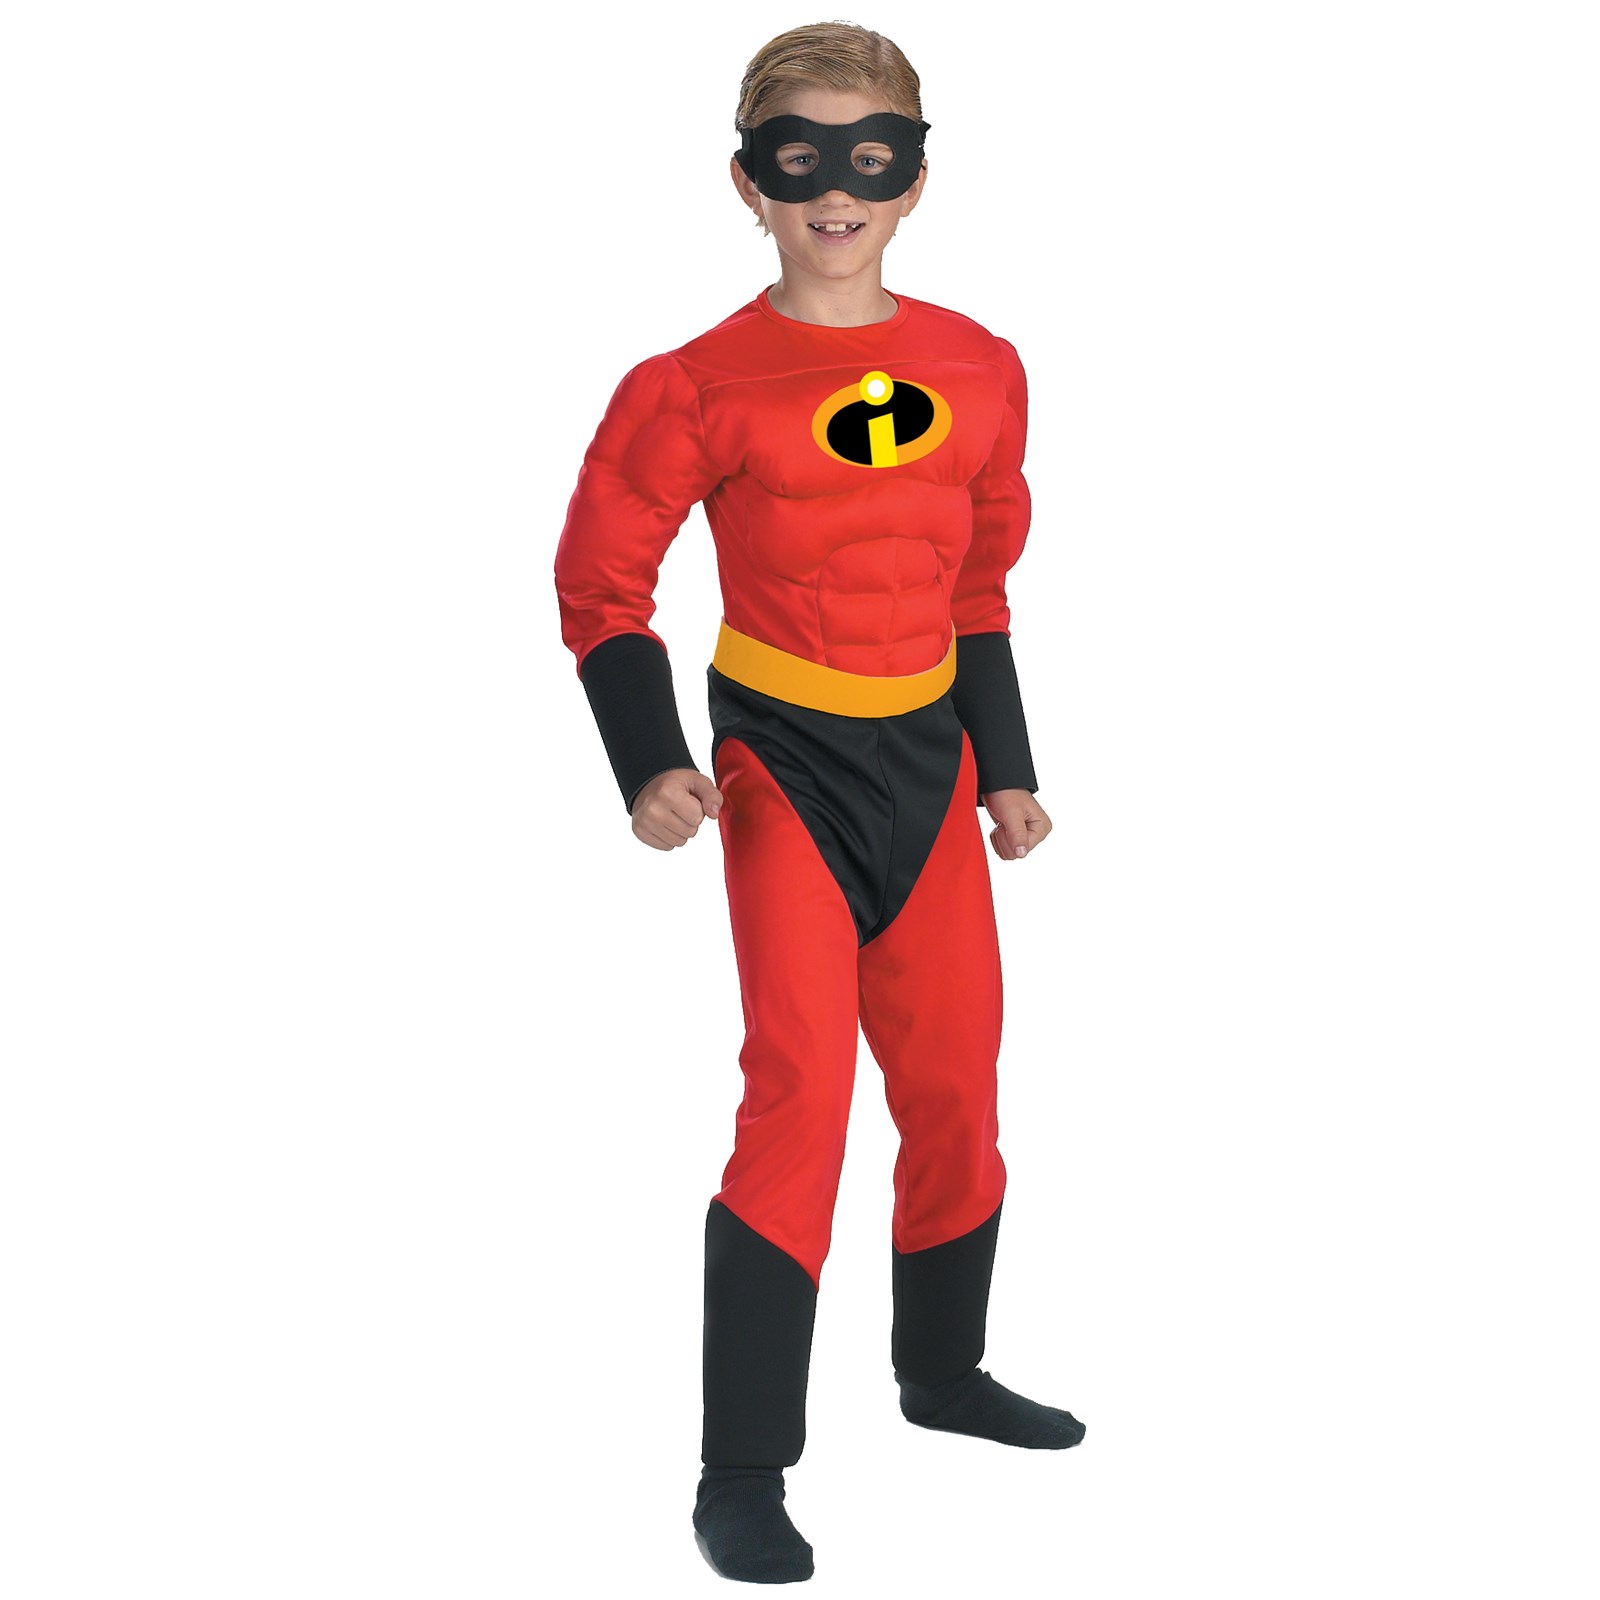 The Incredibles – Dash Muscle Child Costume